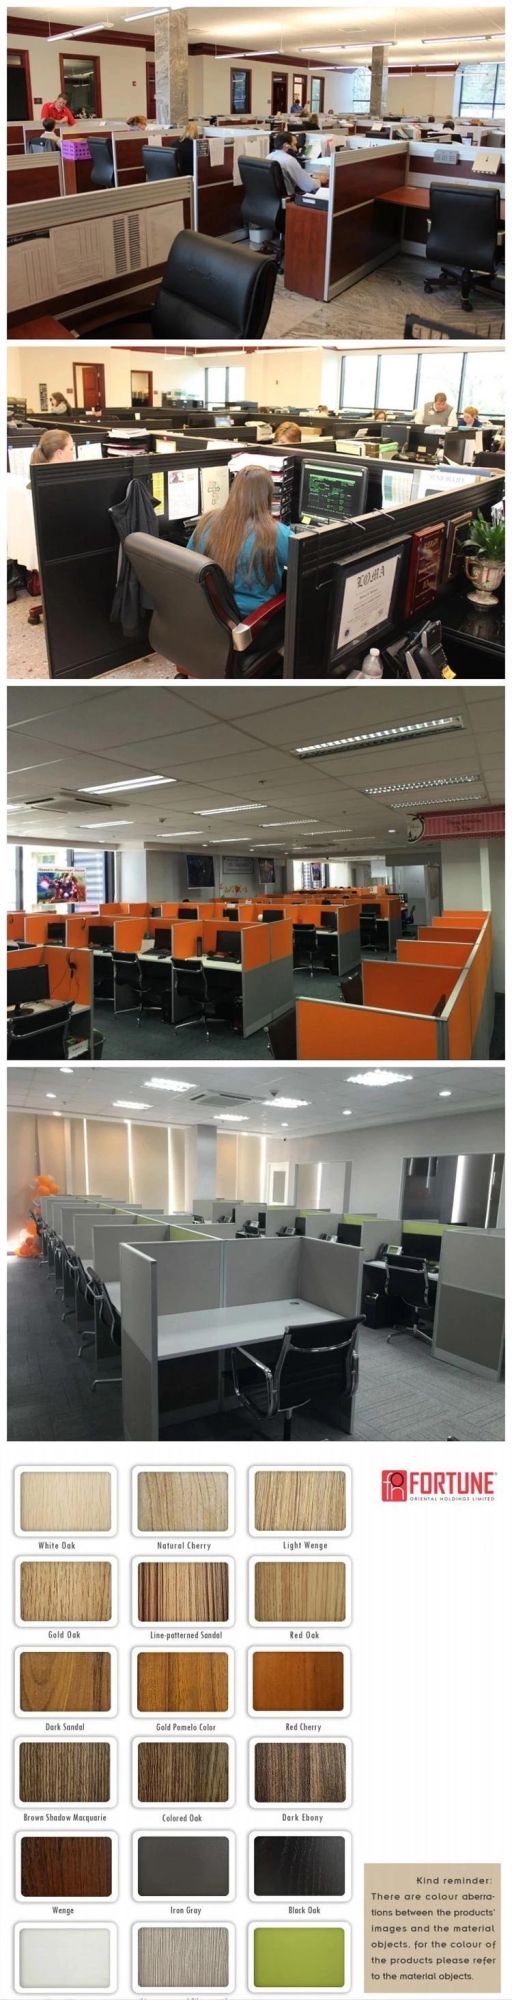 Layout Office Staff 2 Person Face to Face Divider Workstation Ufficio Call Center Cubicle